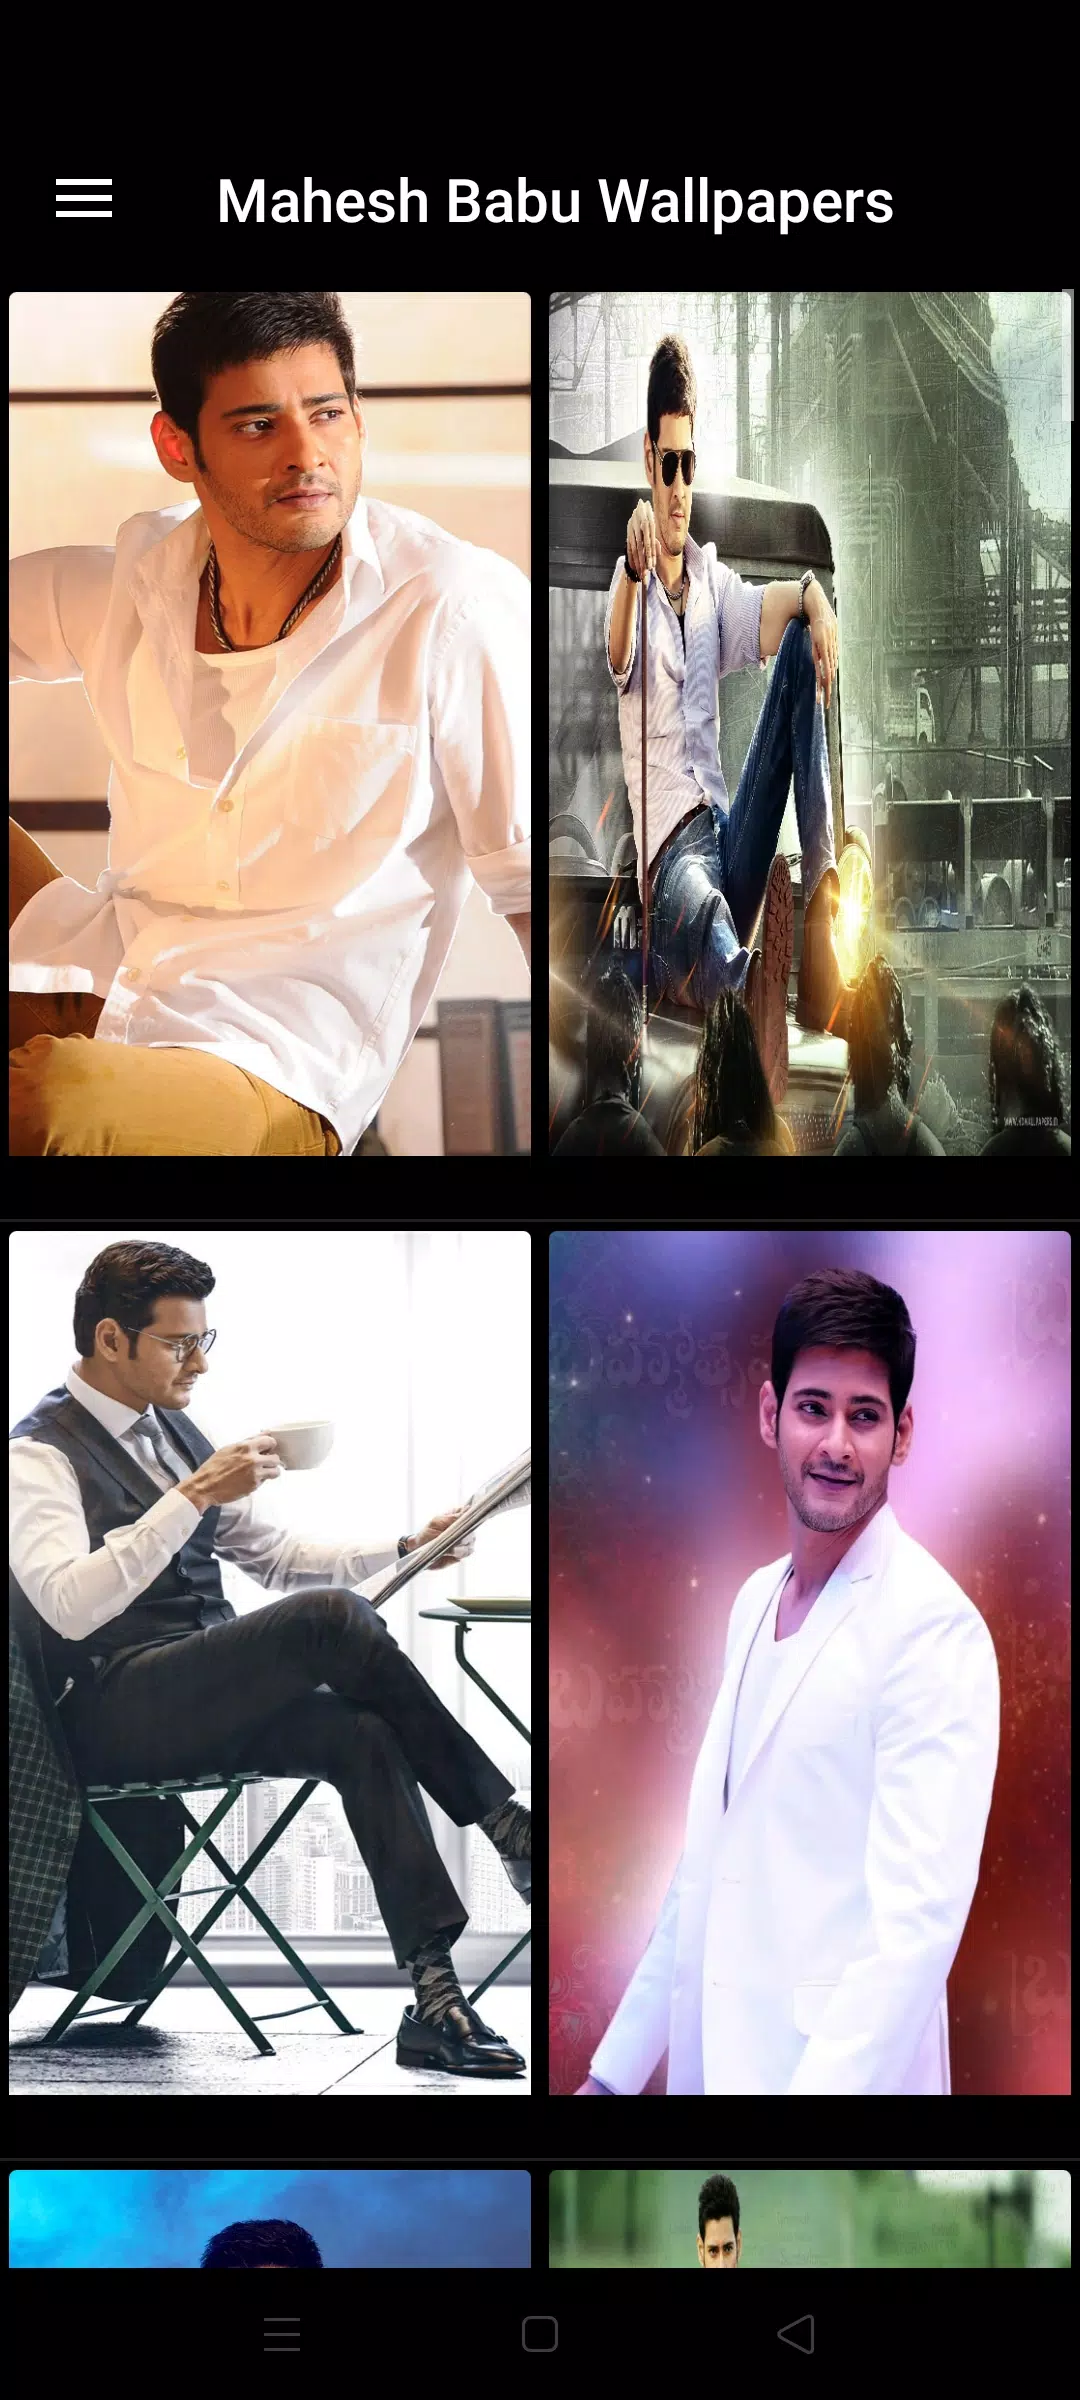 Mahesh babu wallpapers apk for android download